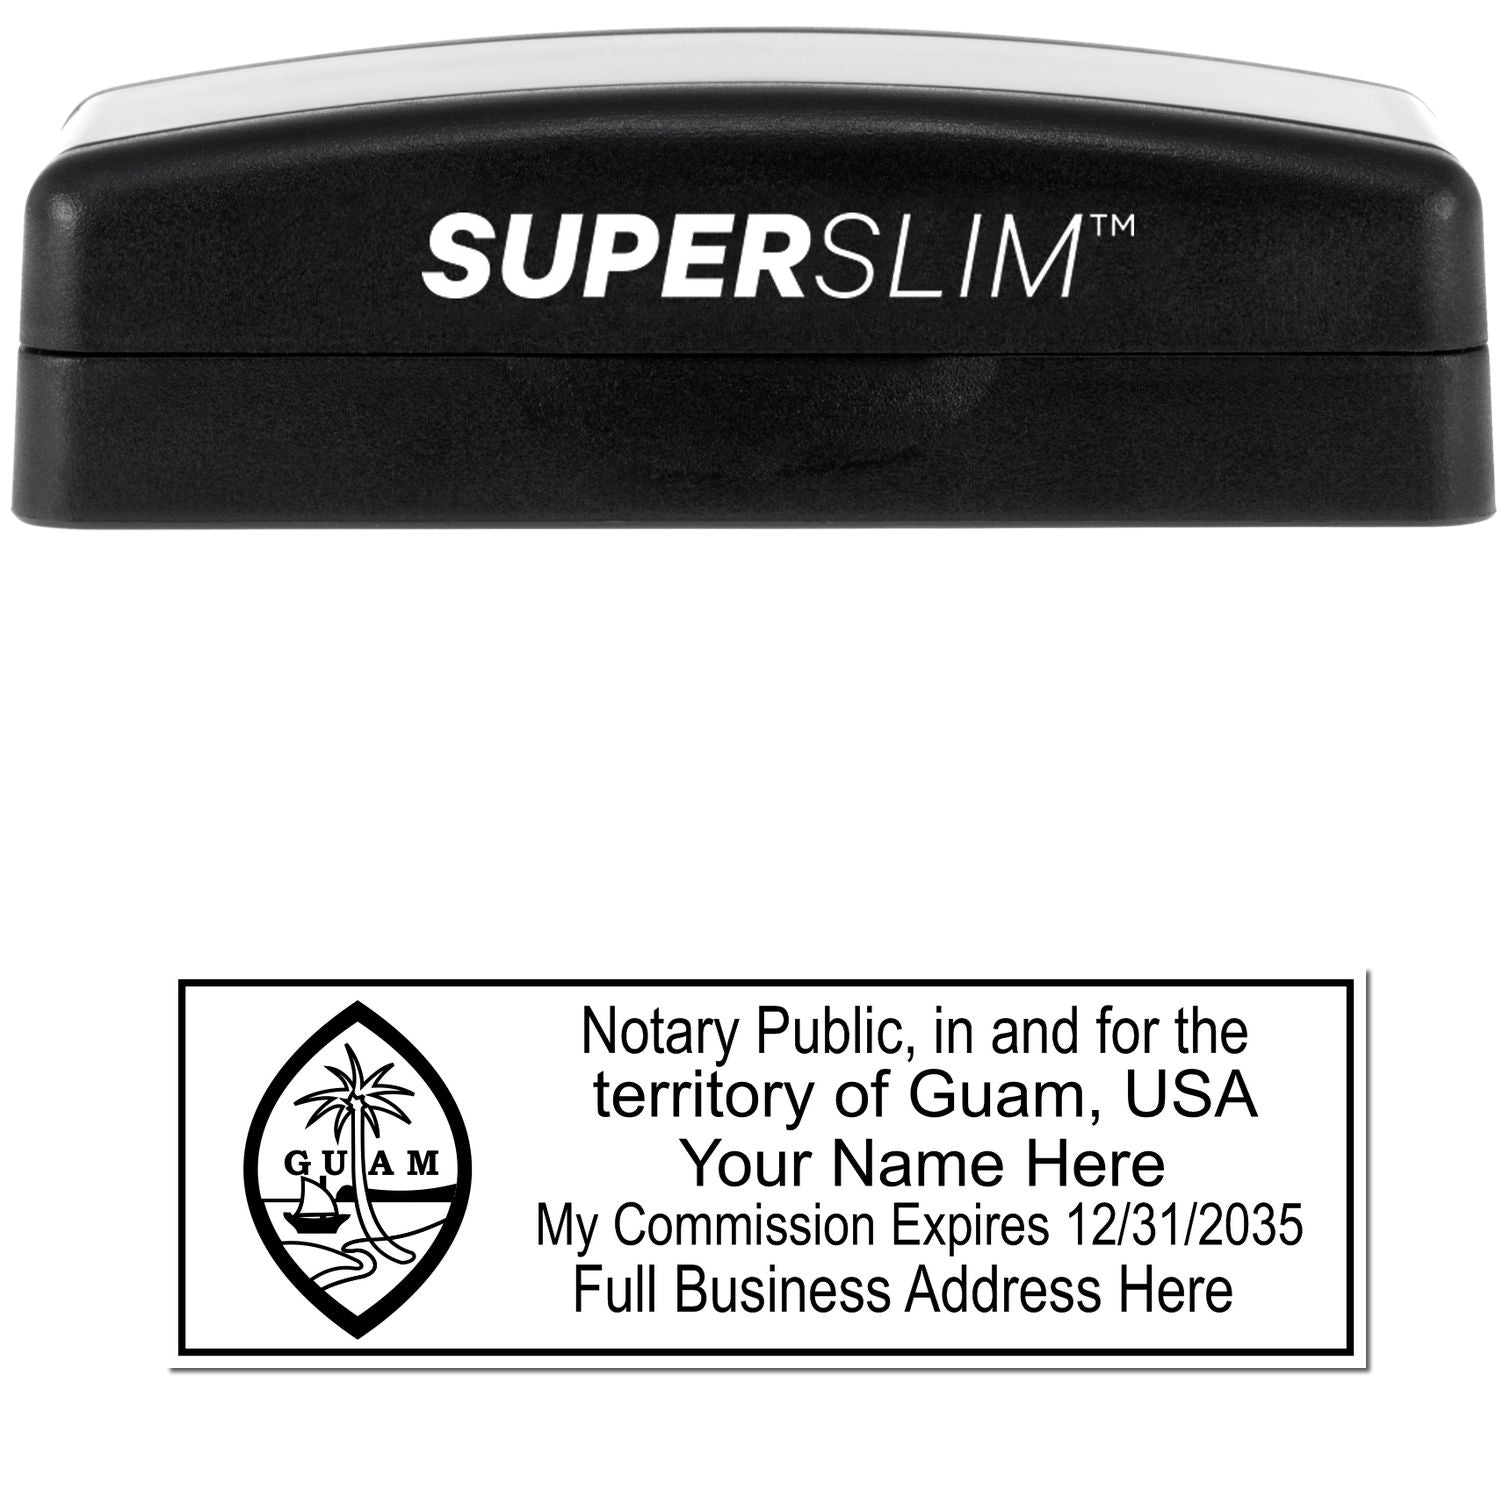 The main image for the Super Slim Guam Notary Public Stamp depicting a sample of the imprint and electronic files